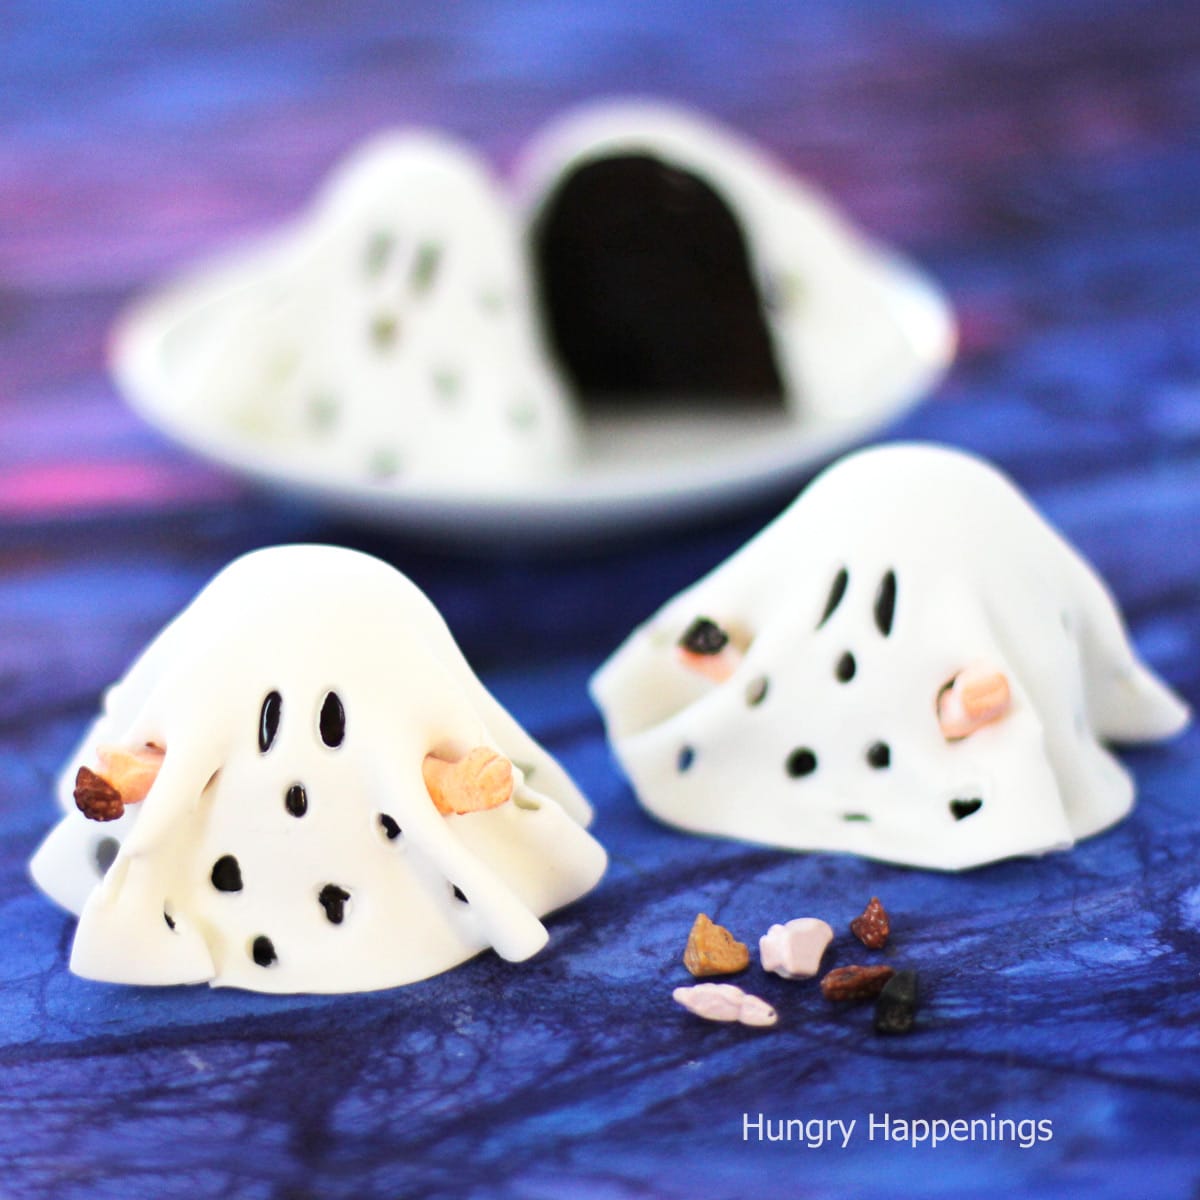 Halloween brownies decorated with Charlie Brown Ghost costumes.